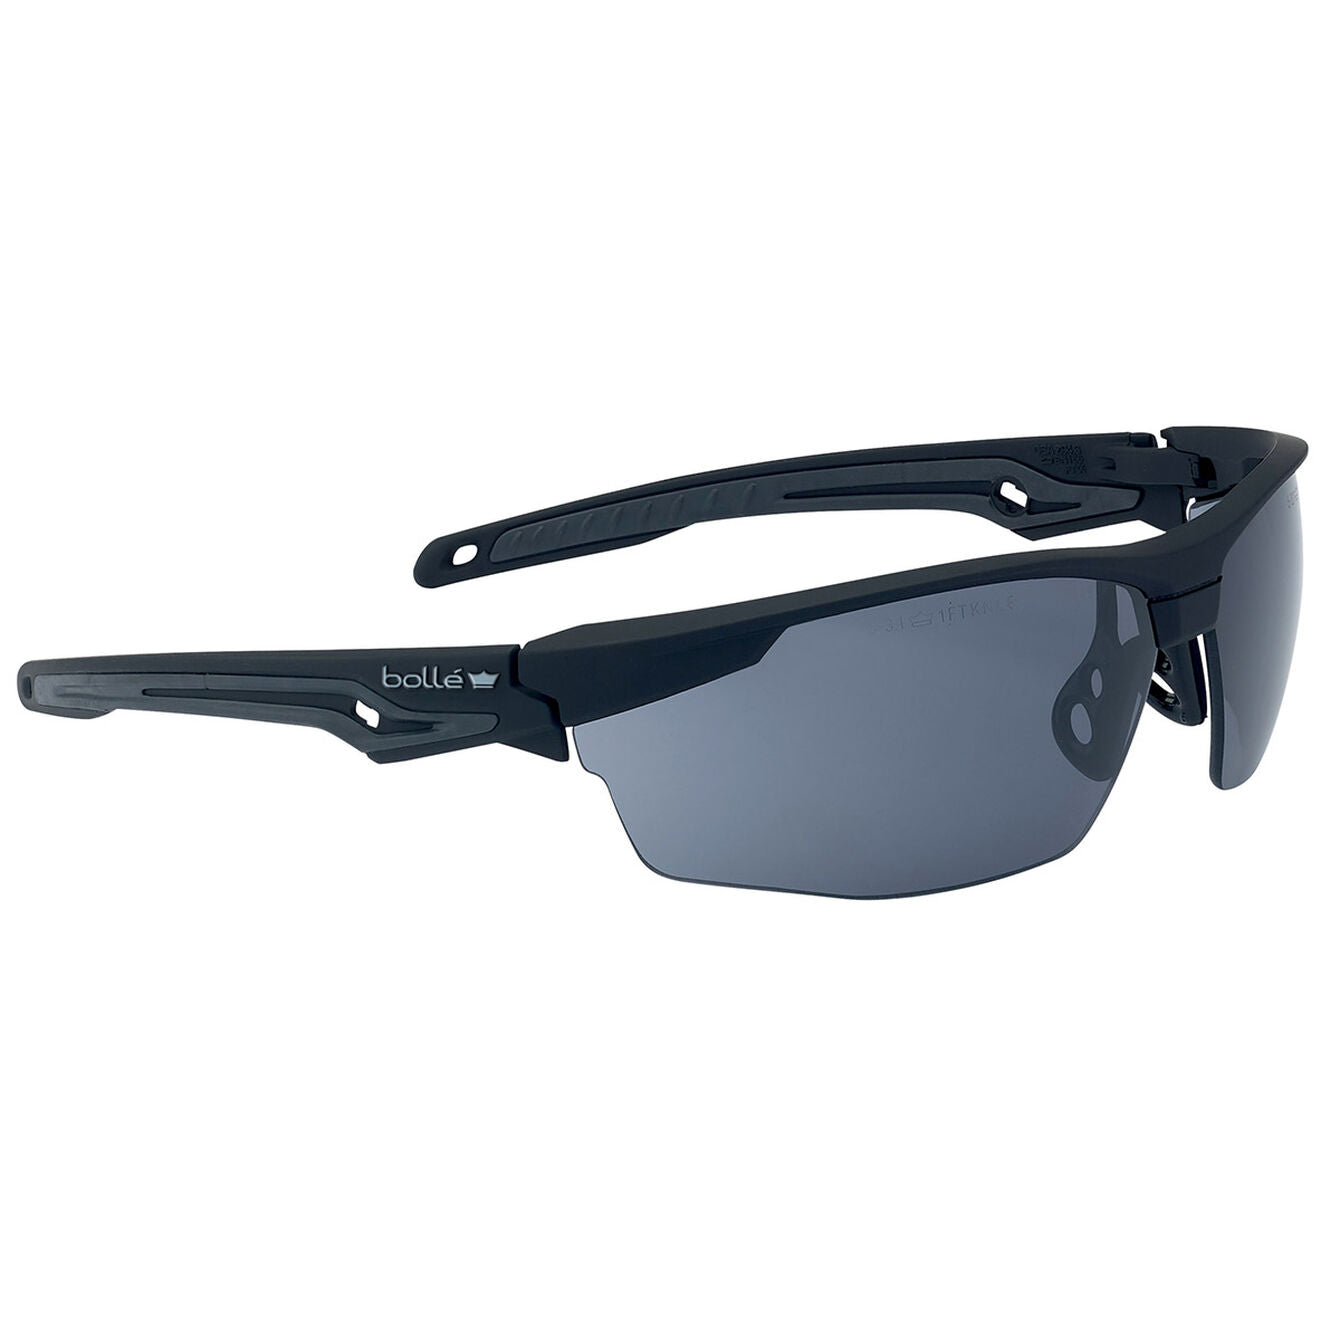 TRYON BSSI PERFORMANCE GLASSES